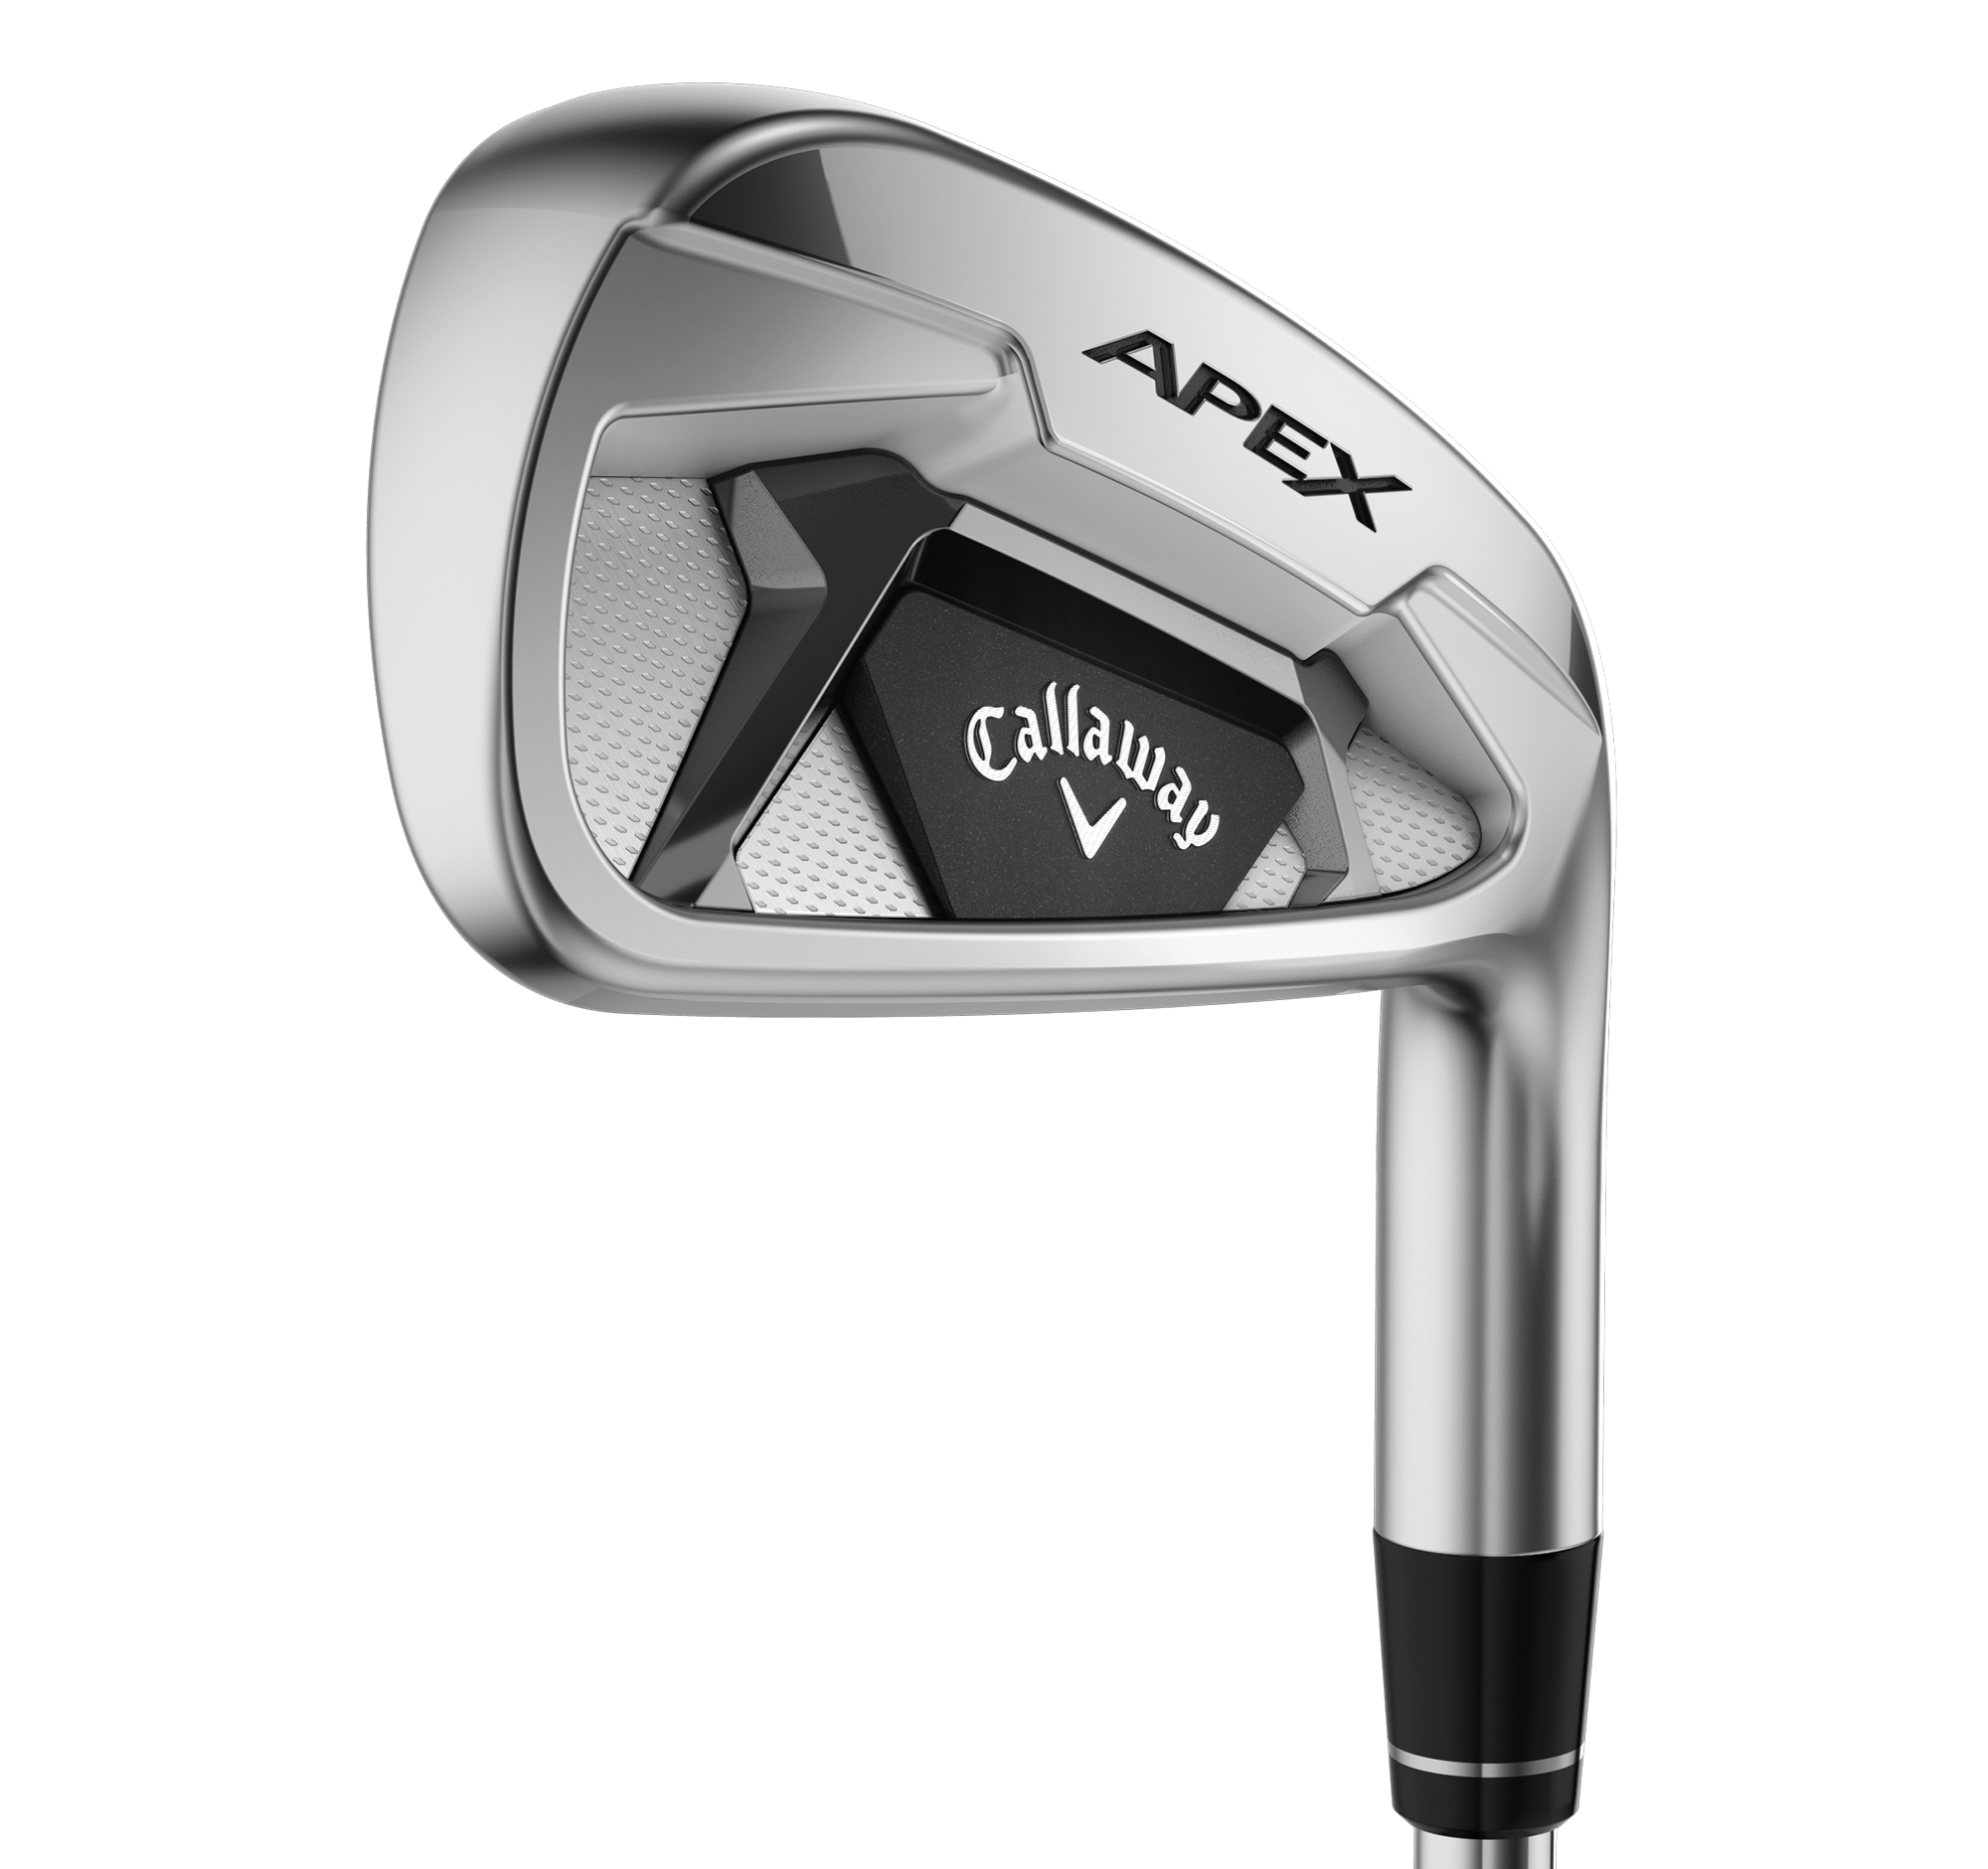 Product image of a Callaway Apex Iron.